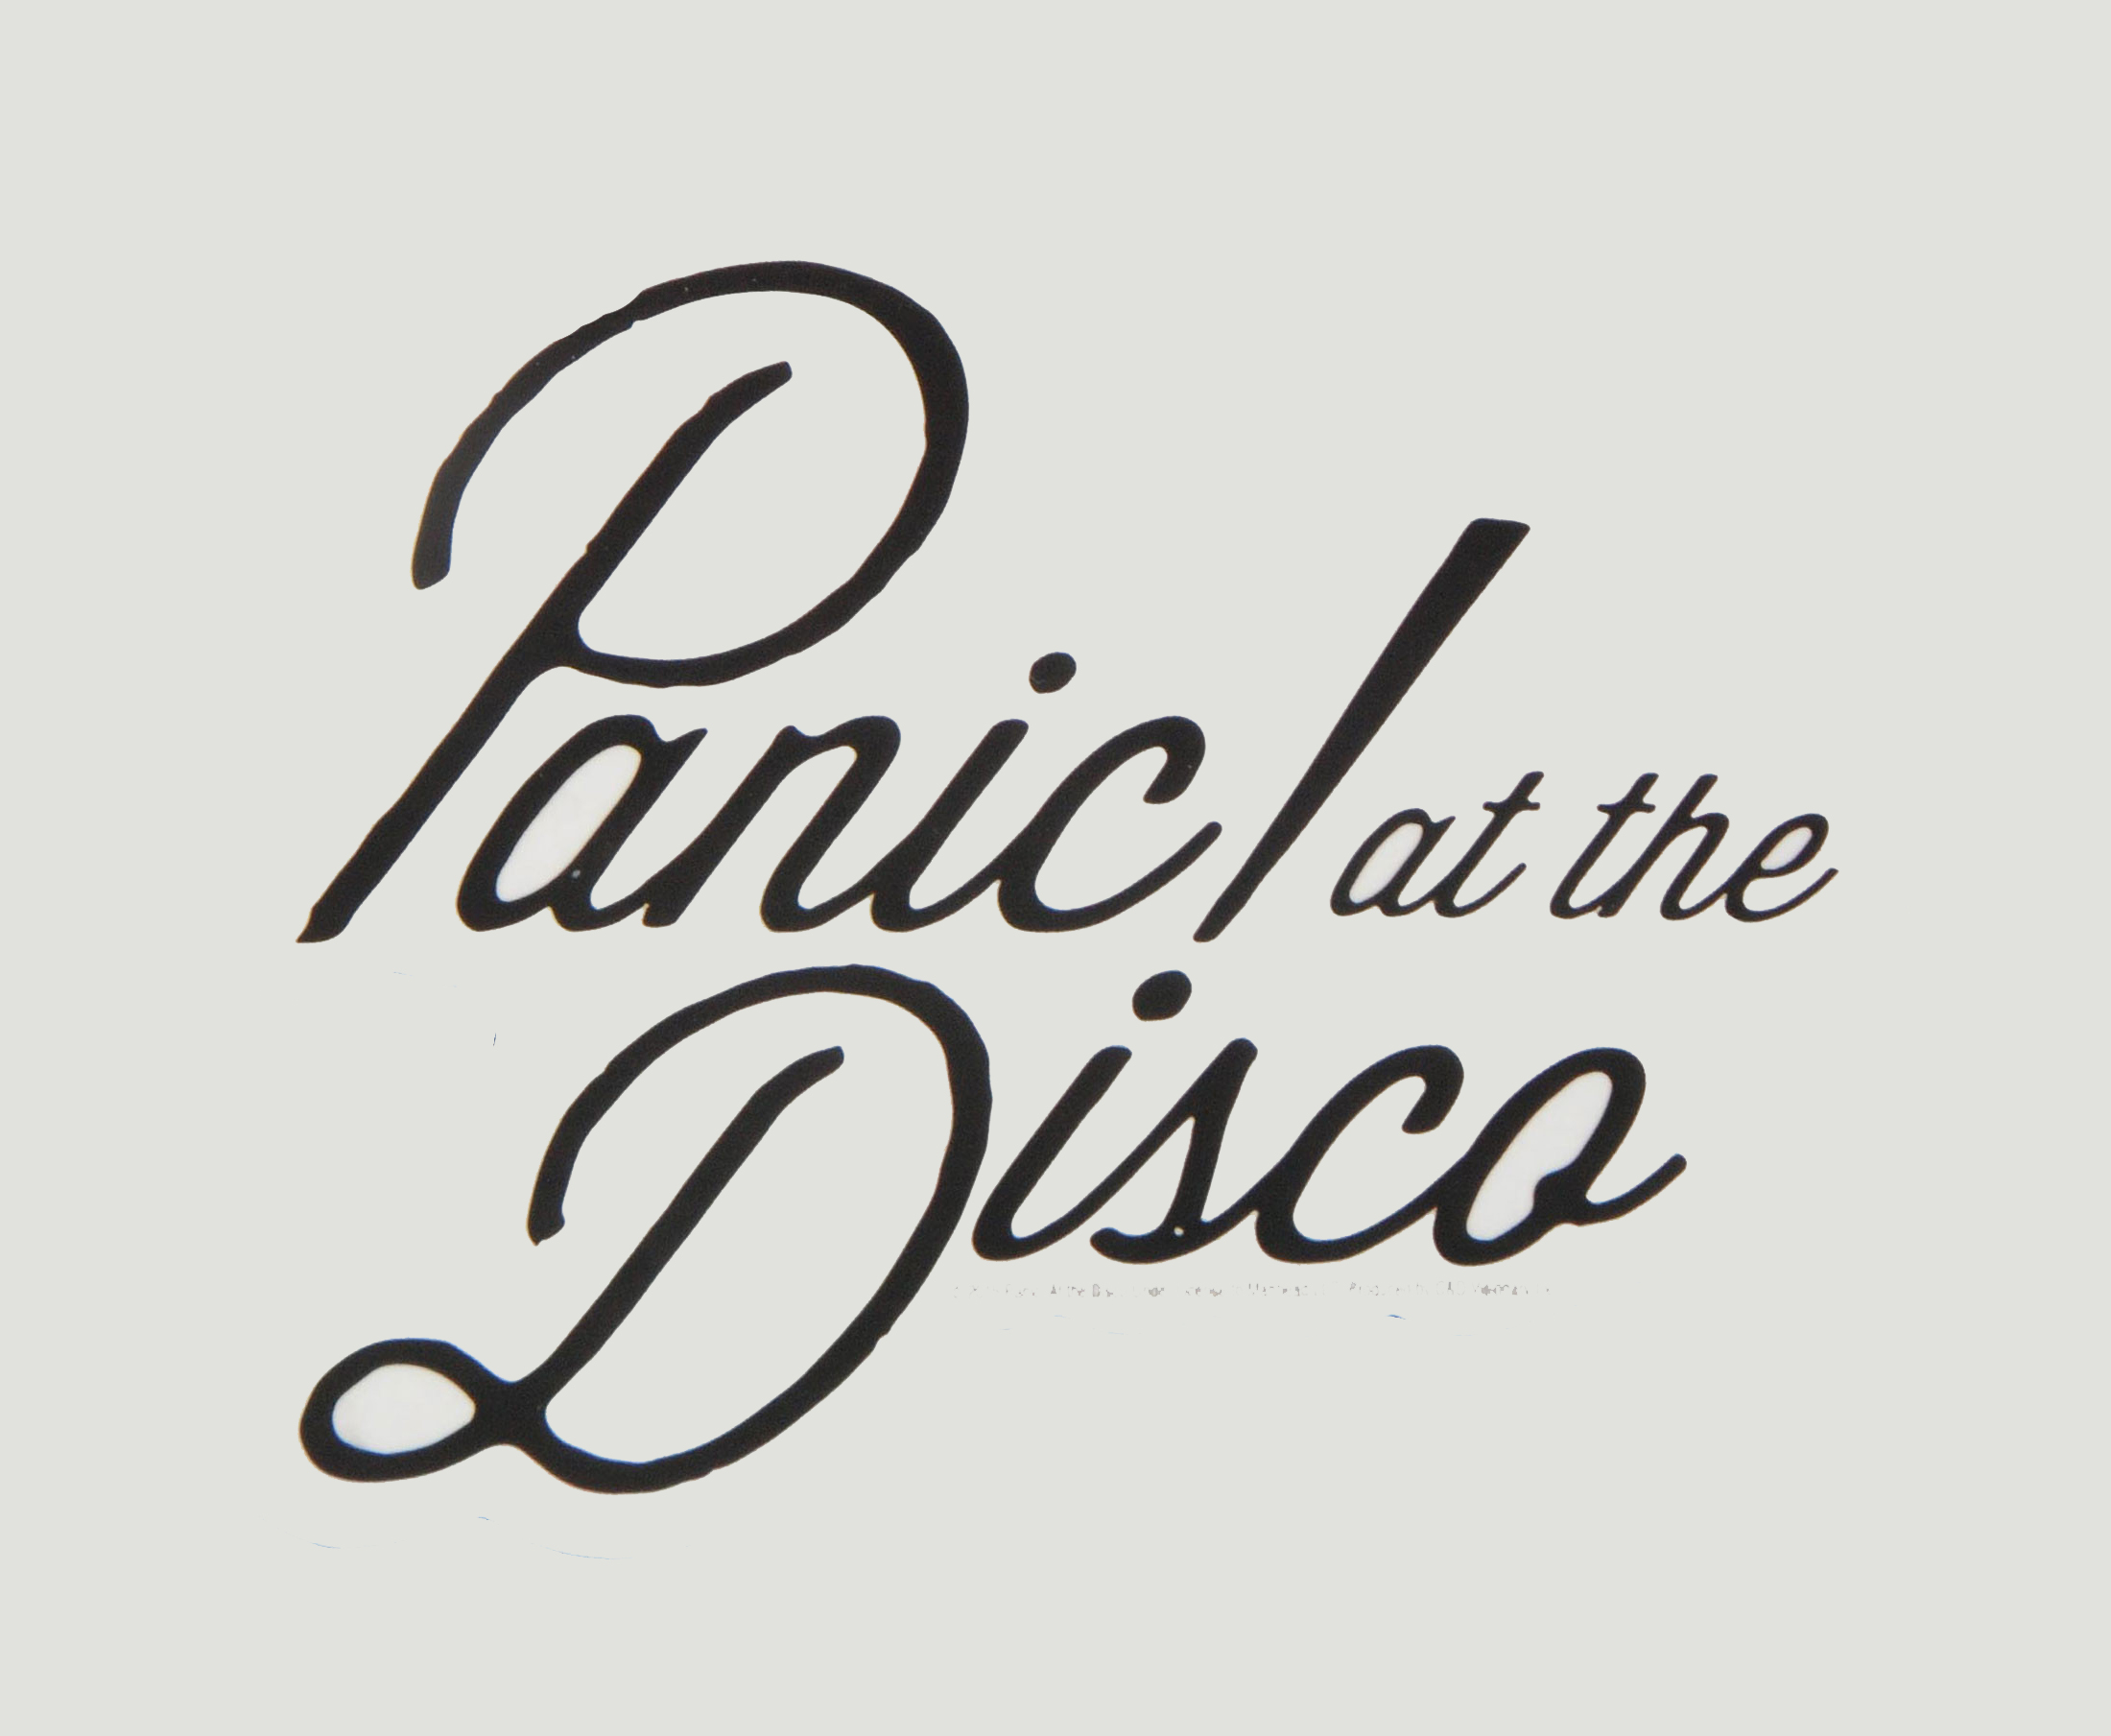 Panic! At The Disco: Northern Downpour Beyond The Video